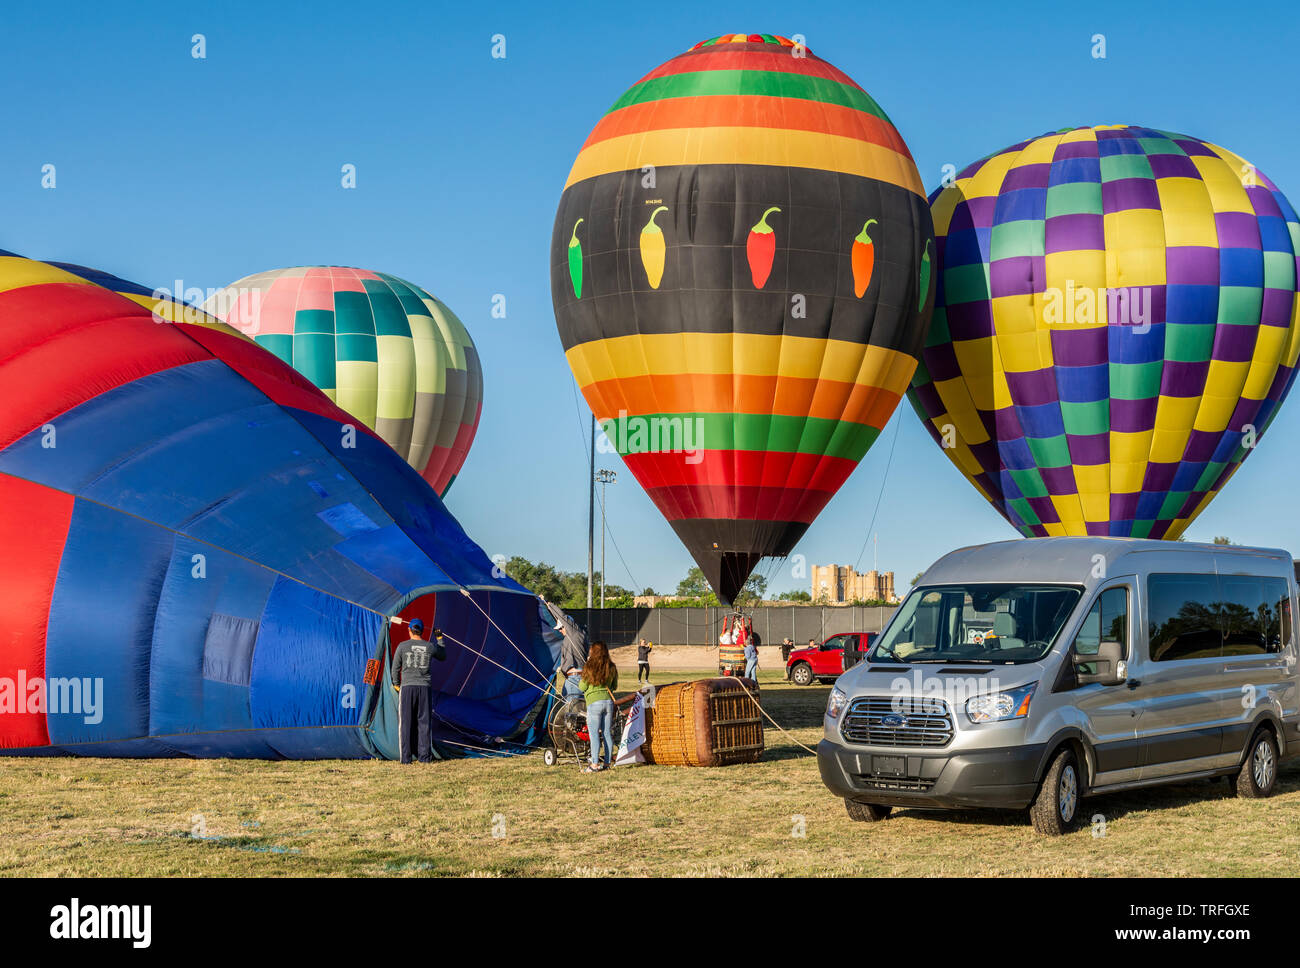 Colorful hot air balloons inflating with crew people at a New Mexico festival. Stock Photo